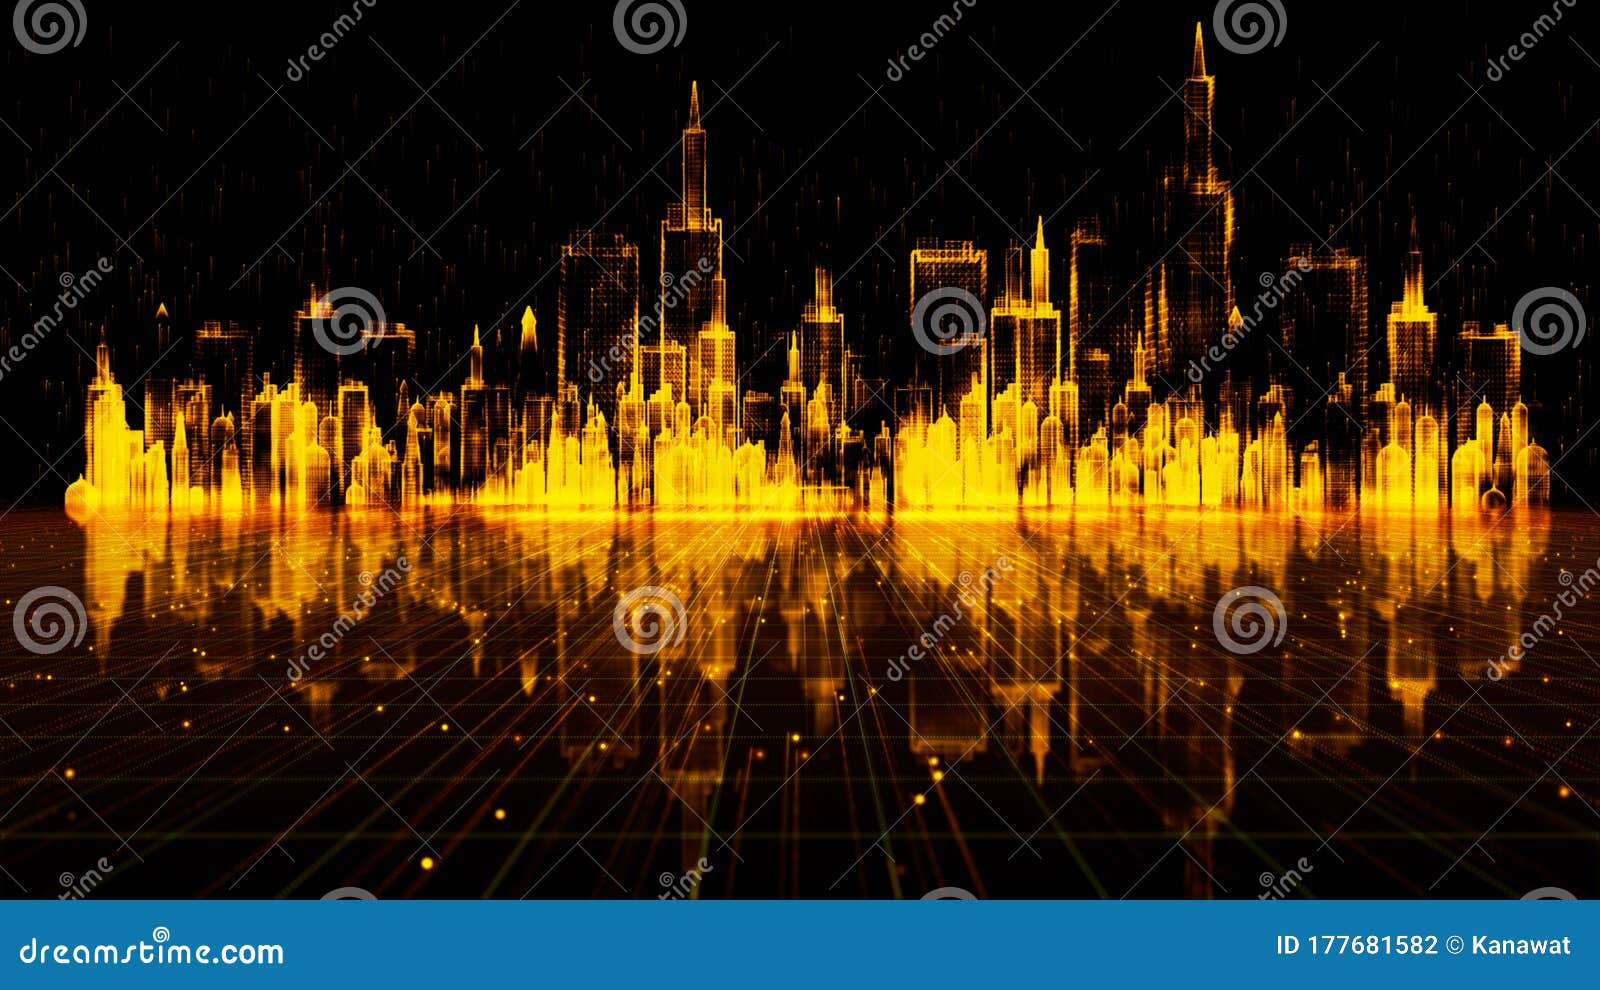 gold color digital city, digital cyberspace with particles, technology data network connections concept